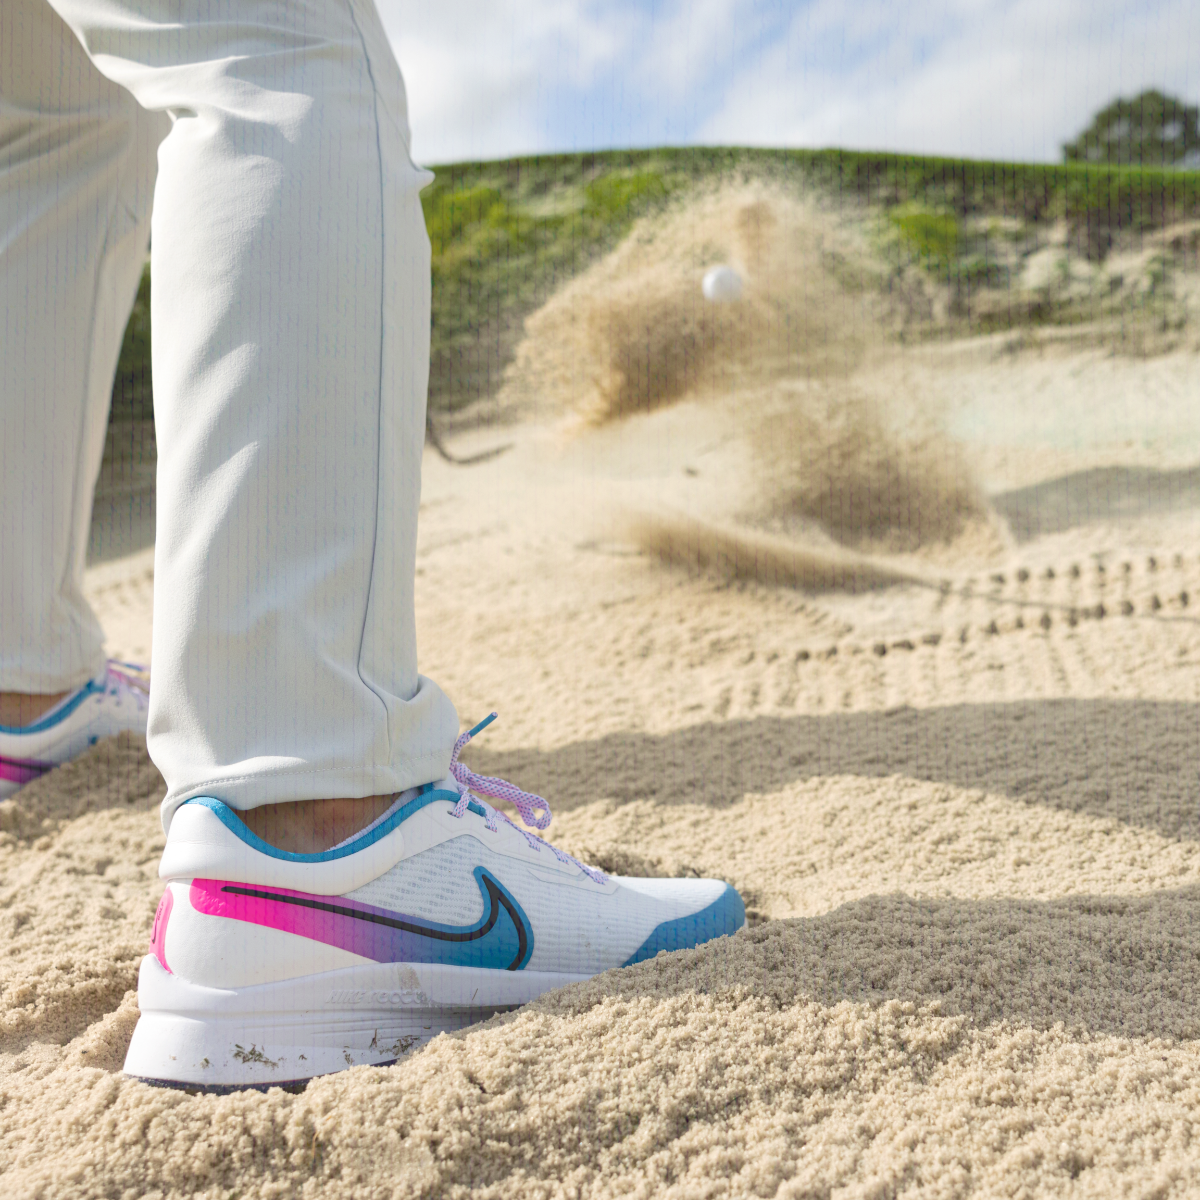 Nike Air Zoom Infinity Tour NEXT% Golf Shoes | Desirable Golf Blog